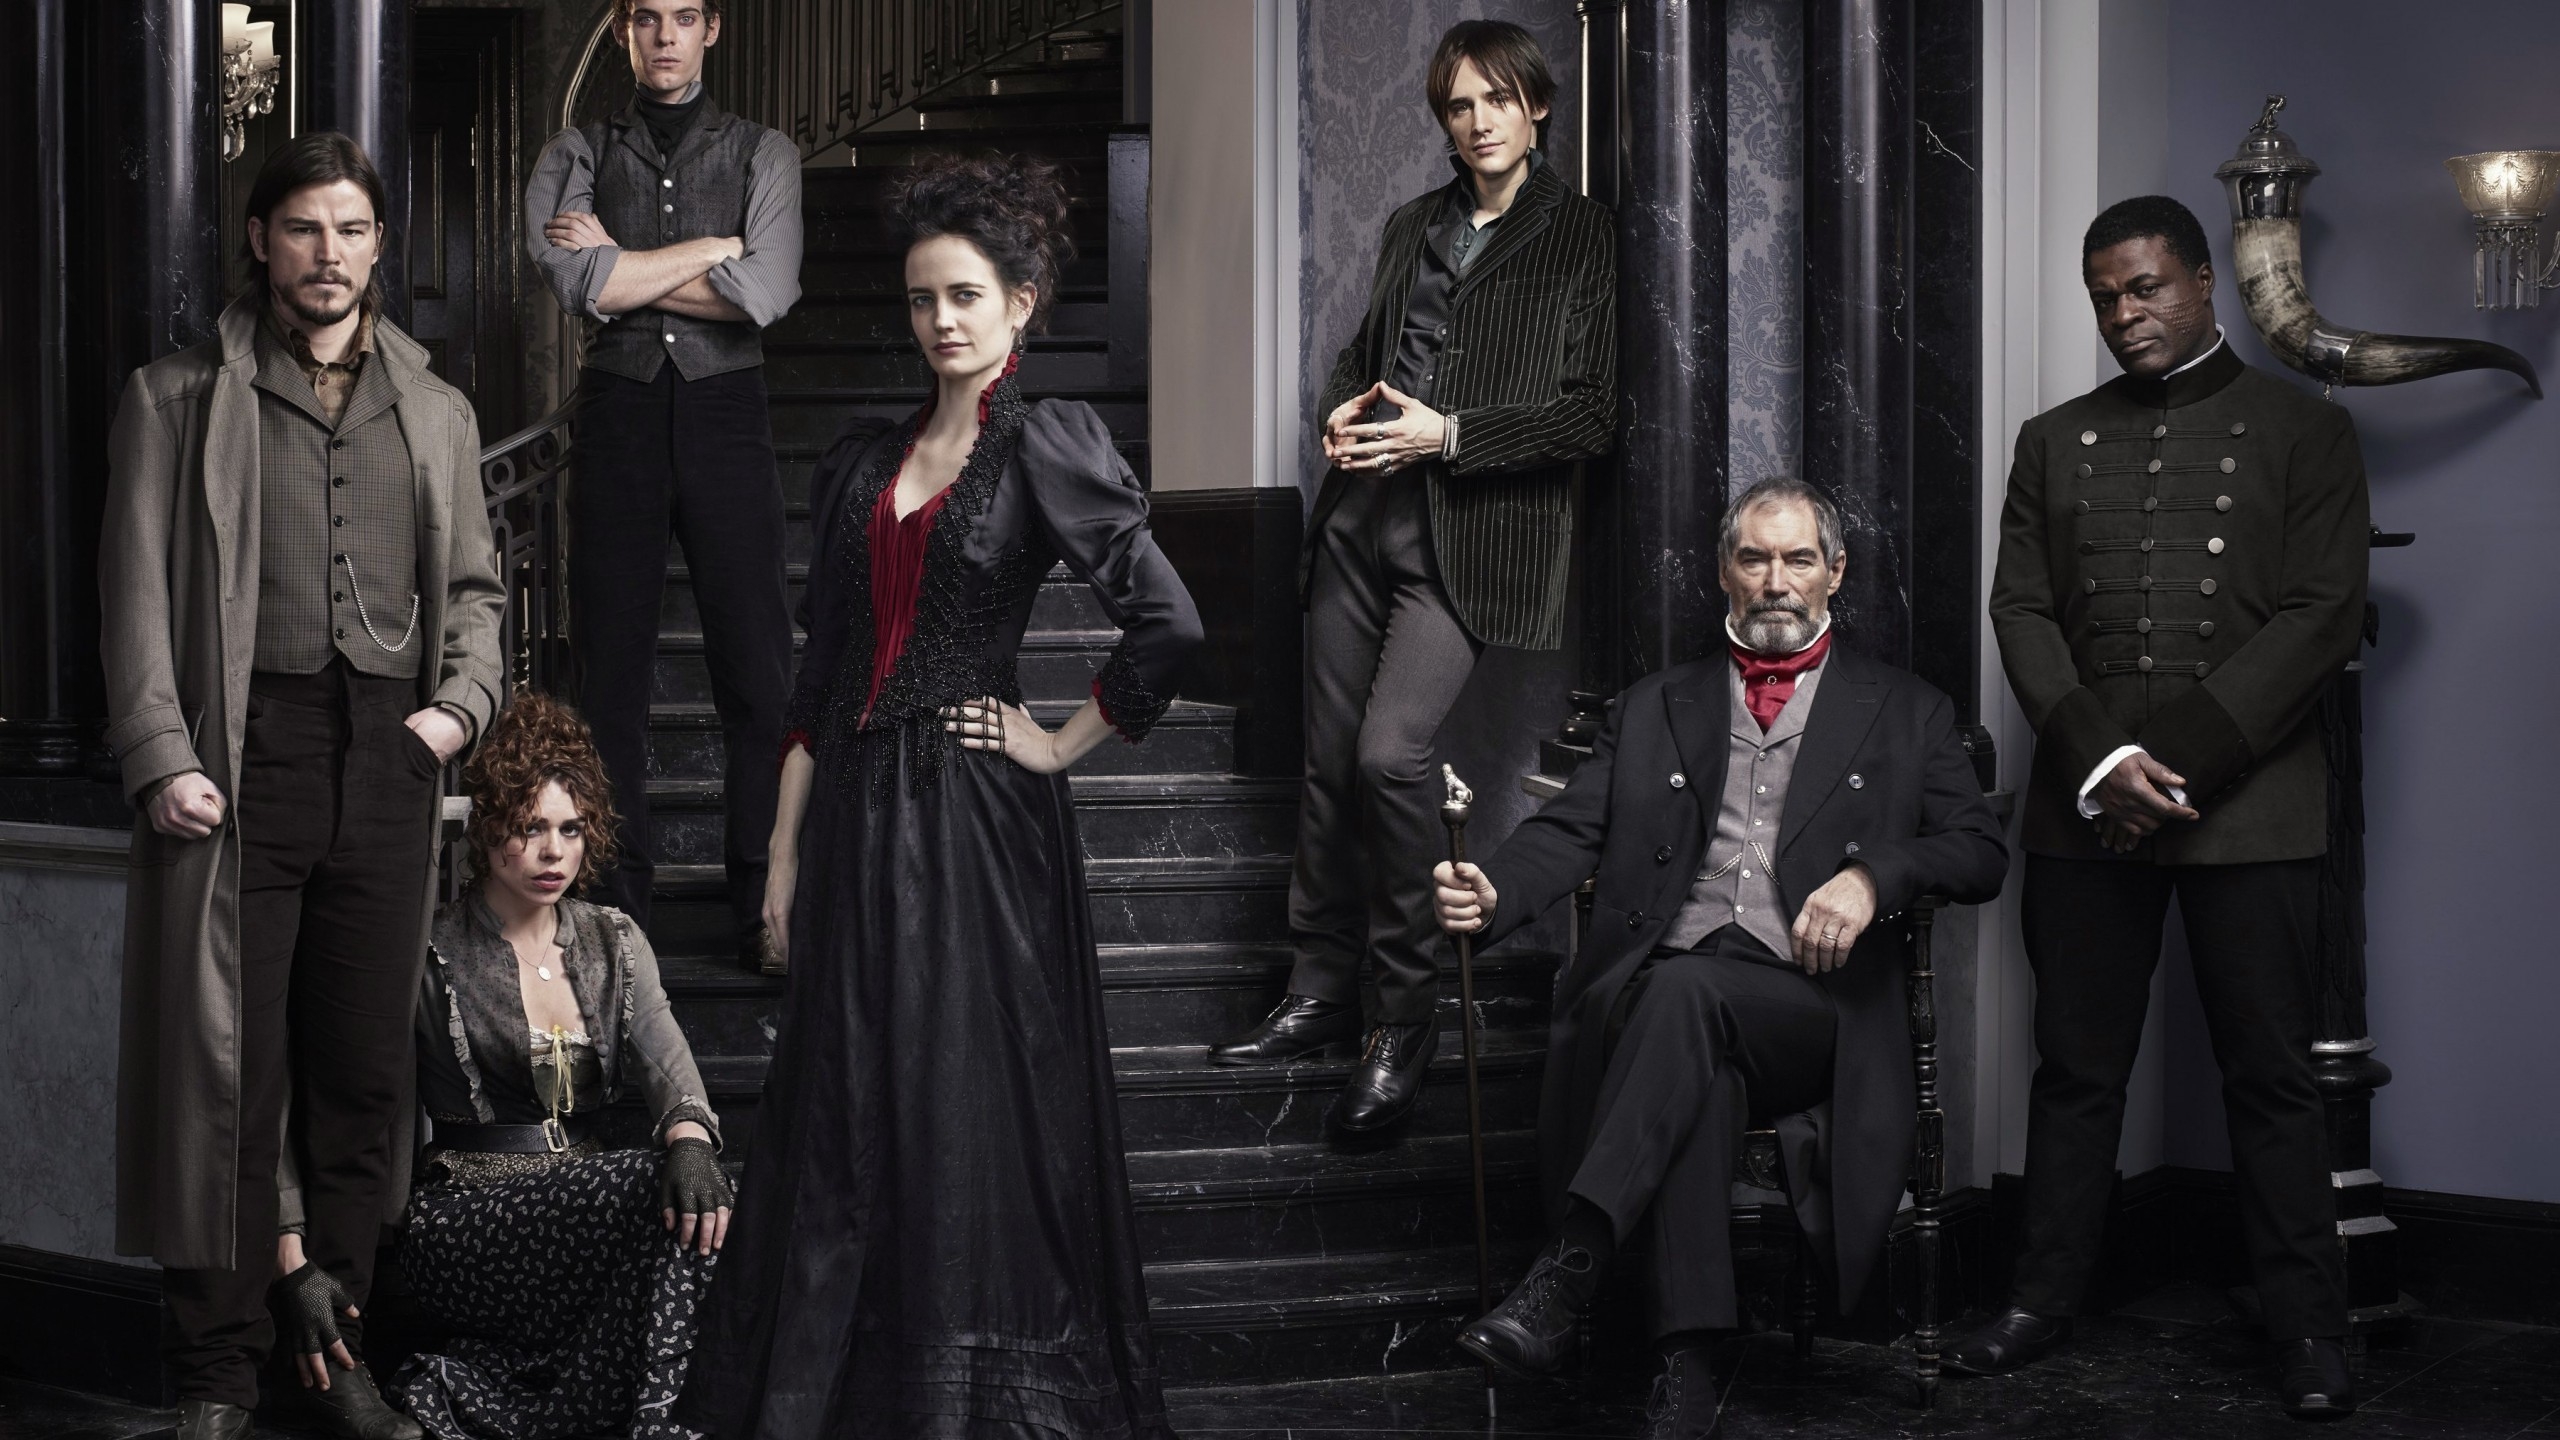 Penny Dreadful for 2560x1440 HDTV resolution